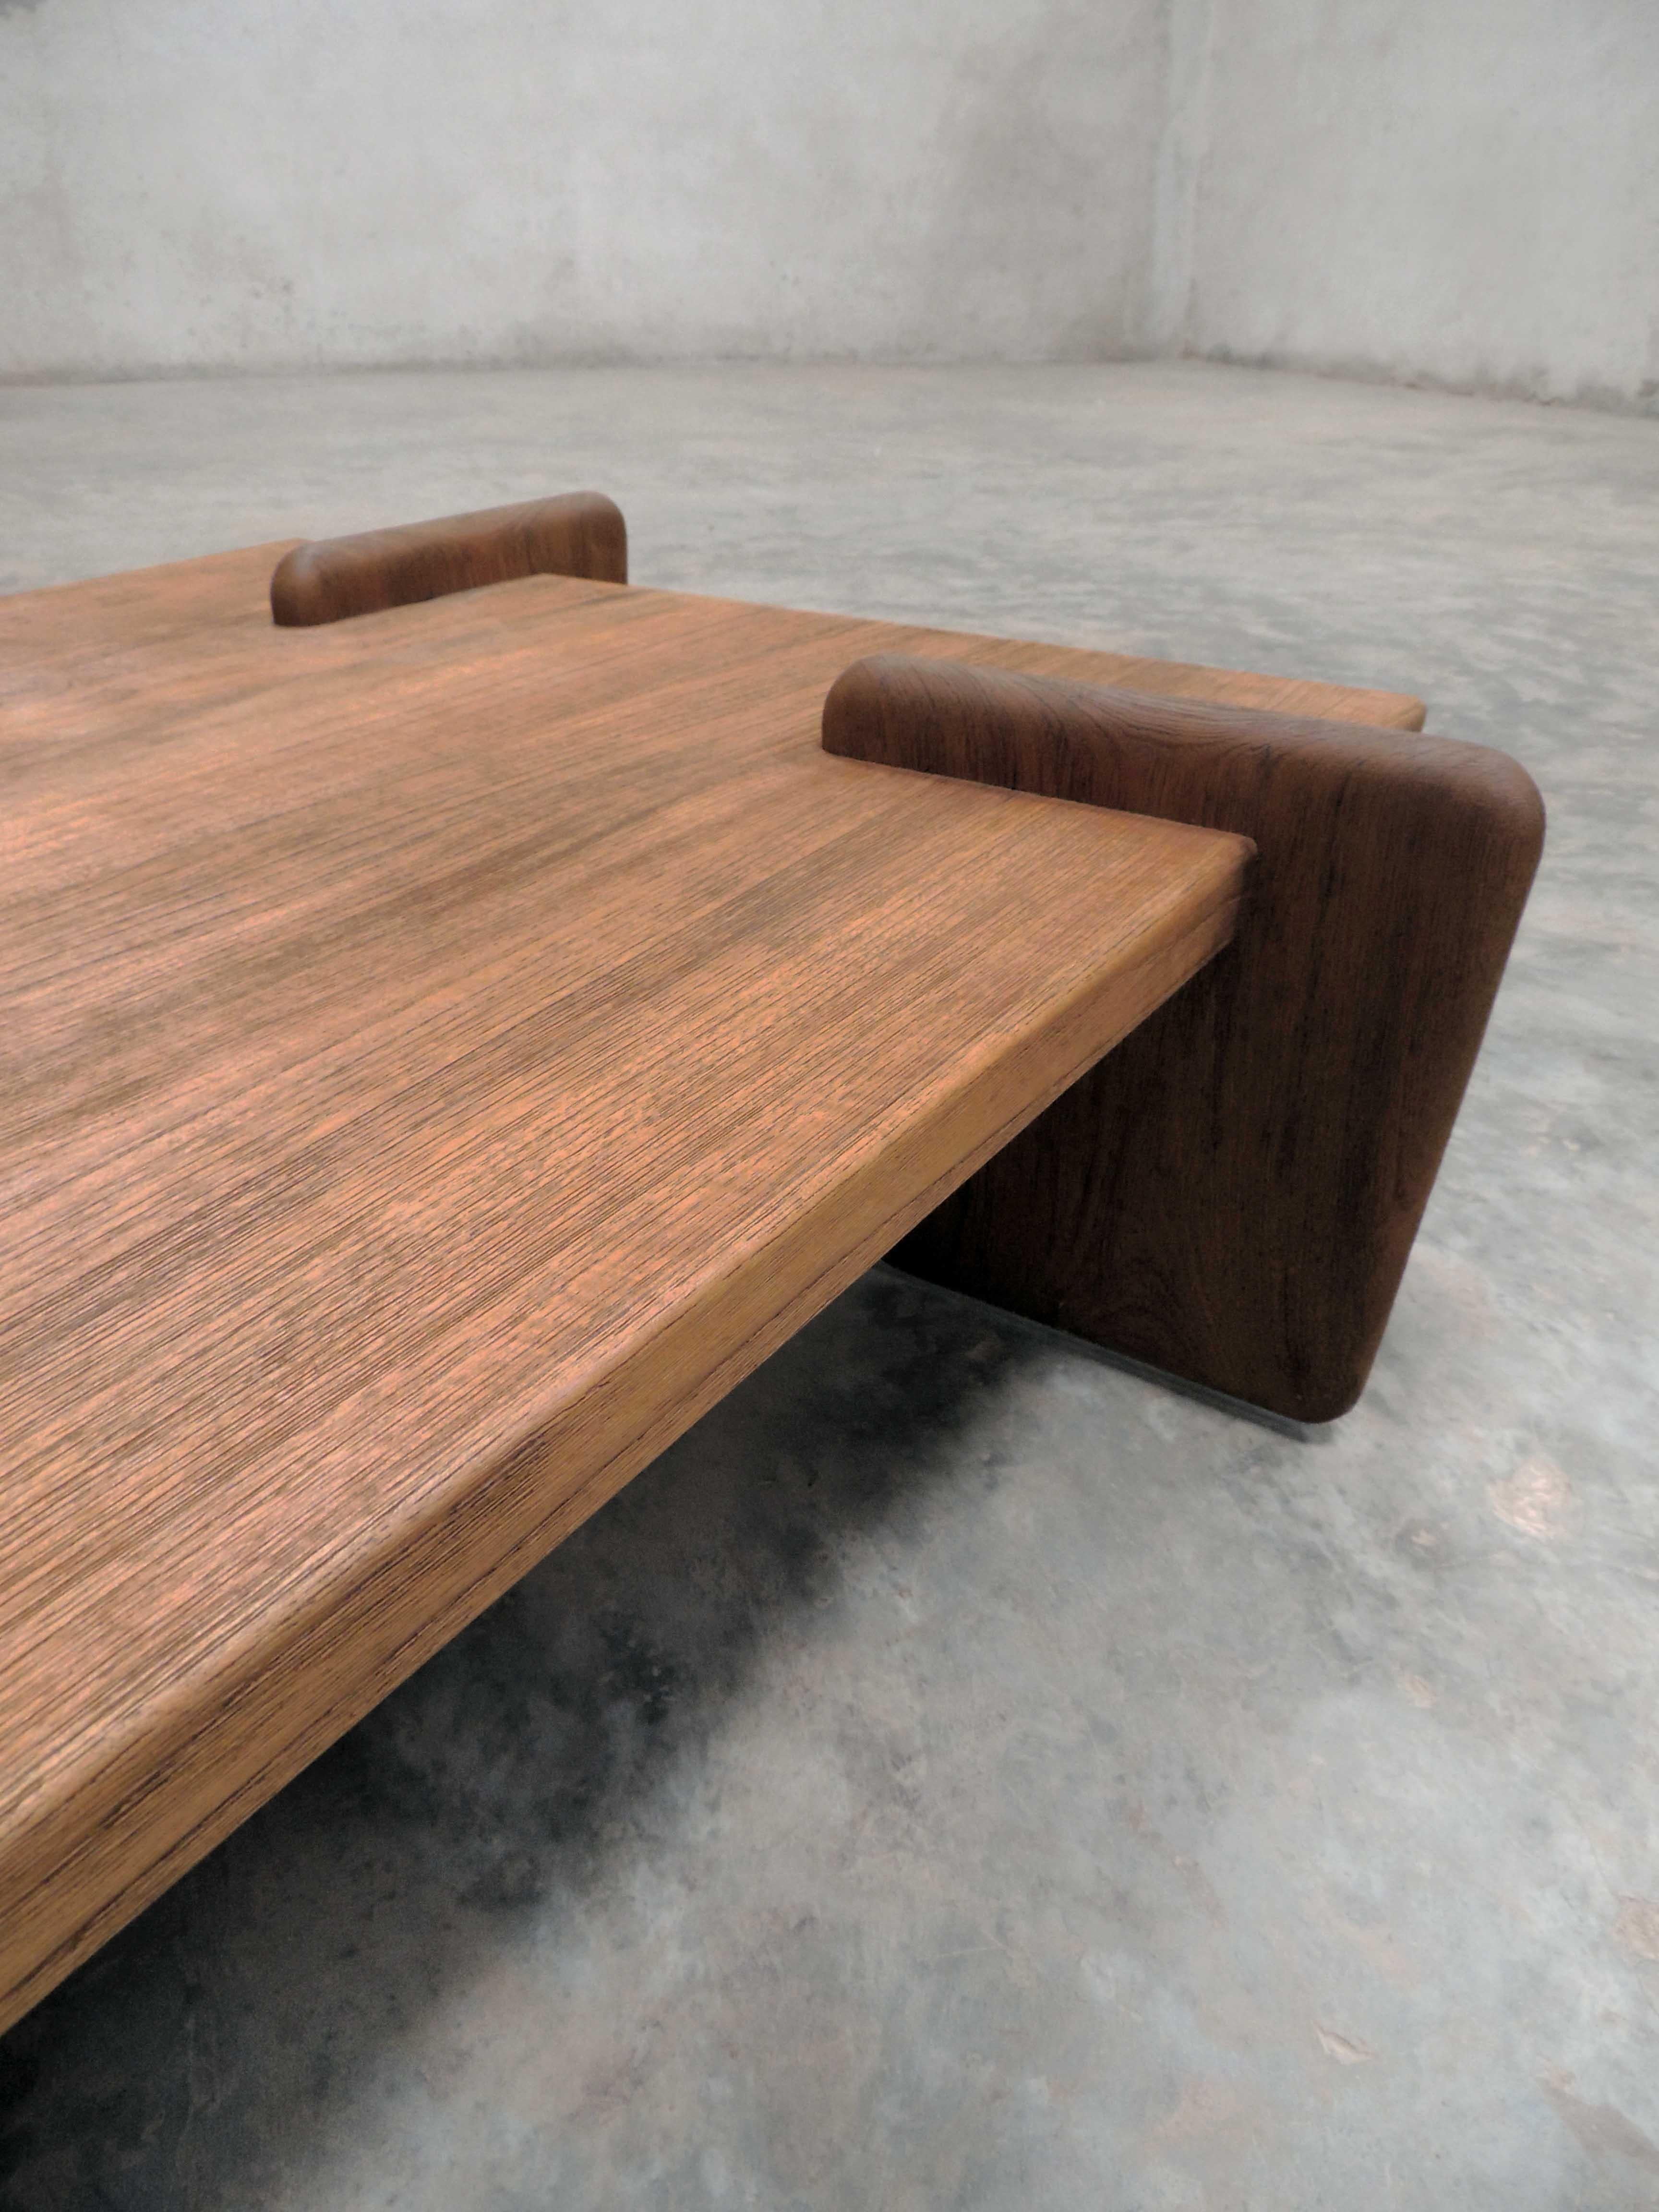 Asian Pierre Jeanneret, Sculptural Coffee Table, Contemporary Reedition